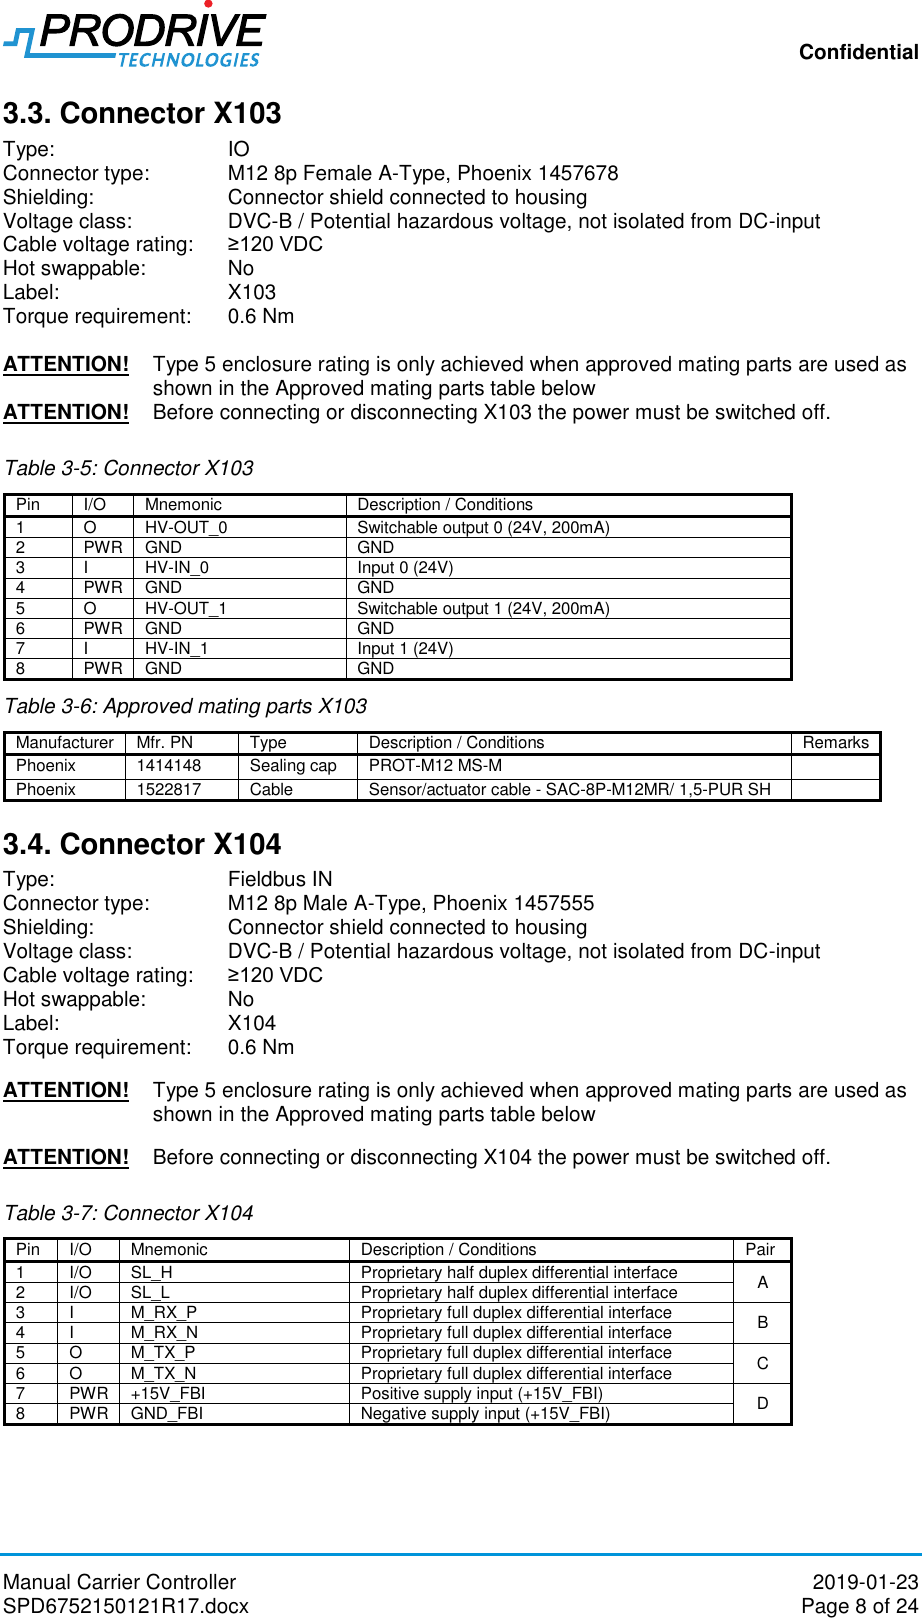 Confidential Manual Carrier Controller  2019-01-23 SPD6752150121R17.docx  Page 8 of 24 3.3. Connector X103 Type:       IO Connector type:   M12 8p Female A-Type, Phoenix 1457678 Shielding:    Connector shield connected to housing Voltage class:    DVC-B / Potential hazardous voltage, not isolated from DC-input Cable voltage rating:   ≥120 VDC Hot swappable:   No Label:       X103 Torque requirement:  0.6 Nm  ATTENTION!  Type 5 enclosure rating is only achieved when approved mating parts are used as shown in the Approved mating parts table below  ATTENTION!  Before connecting or disconnecting X103 the power must be switched off.  Table 3-5: Connector X103 Pin I/O Mnemonic Description / Conditions 1 O HV-OUT_0 Switchable output 0 (24V, 200mA) 2 PWR GND GND 3 I HV-IN_0 Input 0 (24V) 4 PWR GND GND 5 O HV-OUT_1 Switchable output 1 (24V, 200mA) 6 PWR GND GND 7 I HV-IN_1 Input 1 (24V) 8 PWR GND GND Table 3-6: Approved mating parts X103 Manufacturer Mfr. PN Type Description / Conditions Remarks Phoenix 1414148                                                       Sealing cap PROT-M12 MS-M  Phoenix 1522817 Cable Sensor/actuator cable - SAC-8P-M12MR/ 1,5-PUR SH  3.4. Connector X104 Type:       Fieldbus IN Connector type:   M12 8p Male A-Type, Phoenix 1457555 Shielding:    Connector shield connected to housing Voltage class:    DVC-B / Potential hazardous voltage, not isolated from DC-input Cable voltage rating:   ≥120 VDC Hot swappable:   No Label:       X104 Torque requirement:  0.6 Nm  ATTENTION!  Type 5 enclosure rating is only achieved when approved mating parts are used as shown in the Approved mating parts table below   ATTENTION!  Before connecting or disconnecting X104 the power must be switched off.  Table 3-7: Connector X104 Pin I/O Mnemonic Description / Conditions Pair 1 I/O SL_H Proprietary half duplex differential interface A 2 I/O SL_L Proprietary half duplex differential interface 3 I M_RX_P Proprietary full duplex differential interface B 4 I M_RX_N Proprietary full duplex differential interface 5 O M_TX_P Proprietary full duplex differential interface C 6 O M_TX_N Proprietary full duplex differential interface 7 PWR +15V_FBI Positive supply input (+15V_FBI) D 8 PWR GND_FBI Negative supply input (+15V_FBI) 